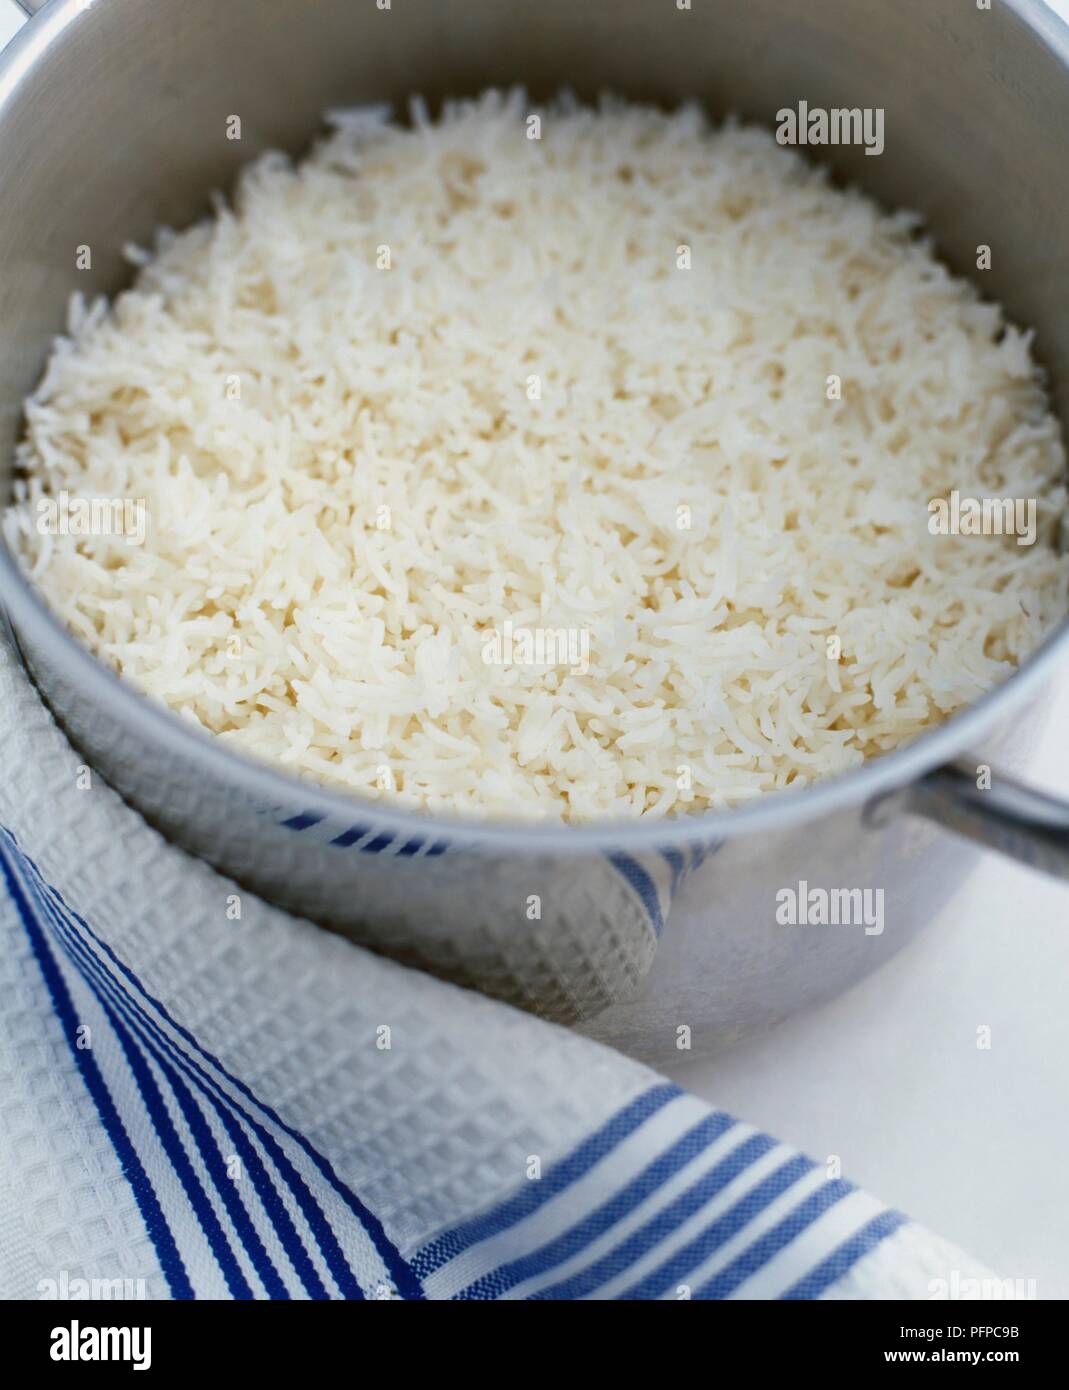 Boiled white rice in large saucepan Stock Photo